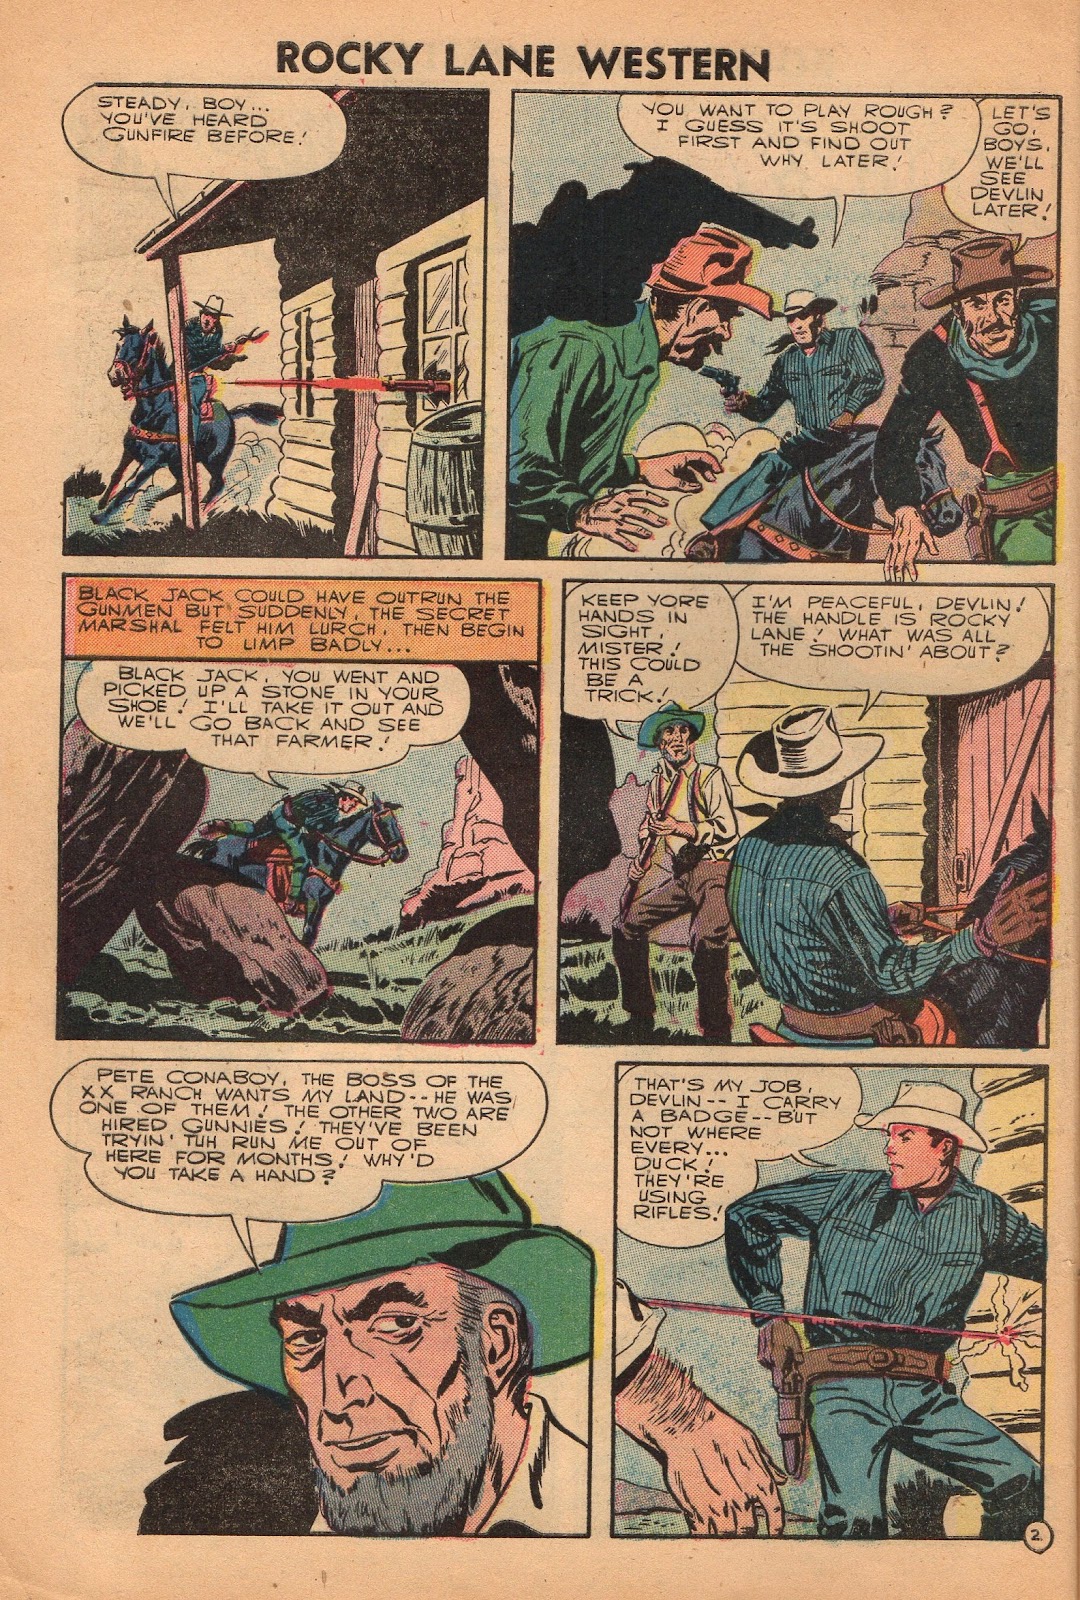 Rocky Lane Western (1954) issue 72 - Page 4